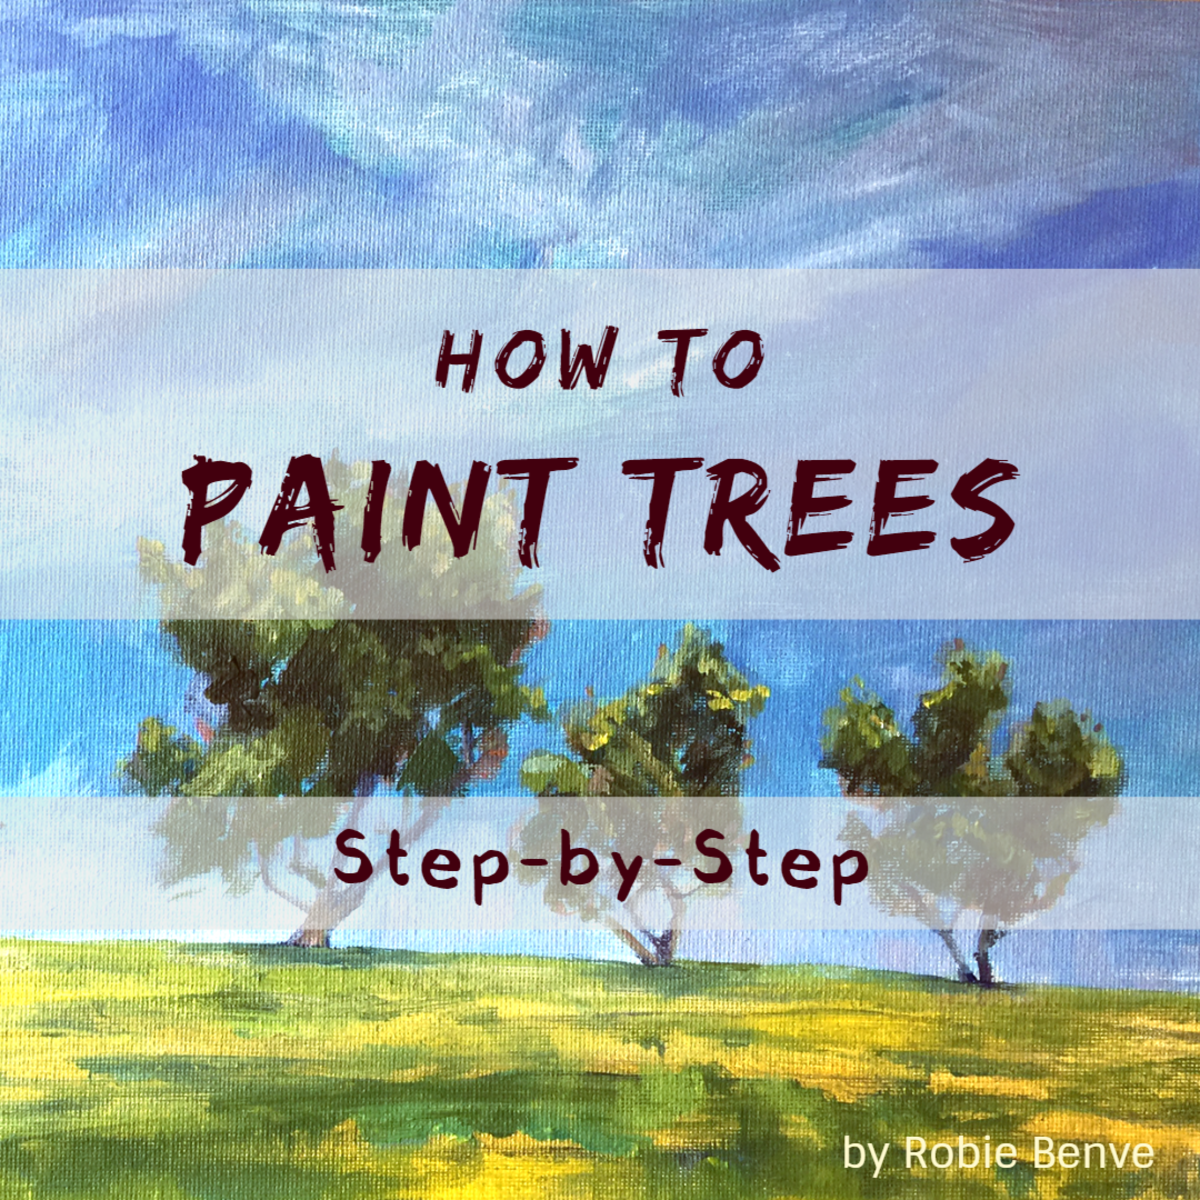 Learn the 10 steps to painting trees, starting with the most important feature of the tree, its contour, and ending with the details. Robie Benve shares her ten secrets to painting trees that are believable and that present character and dimension.